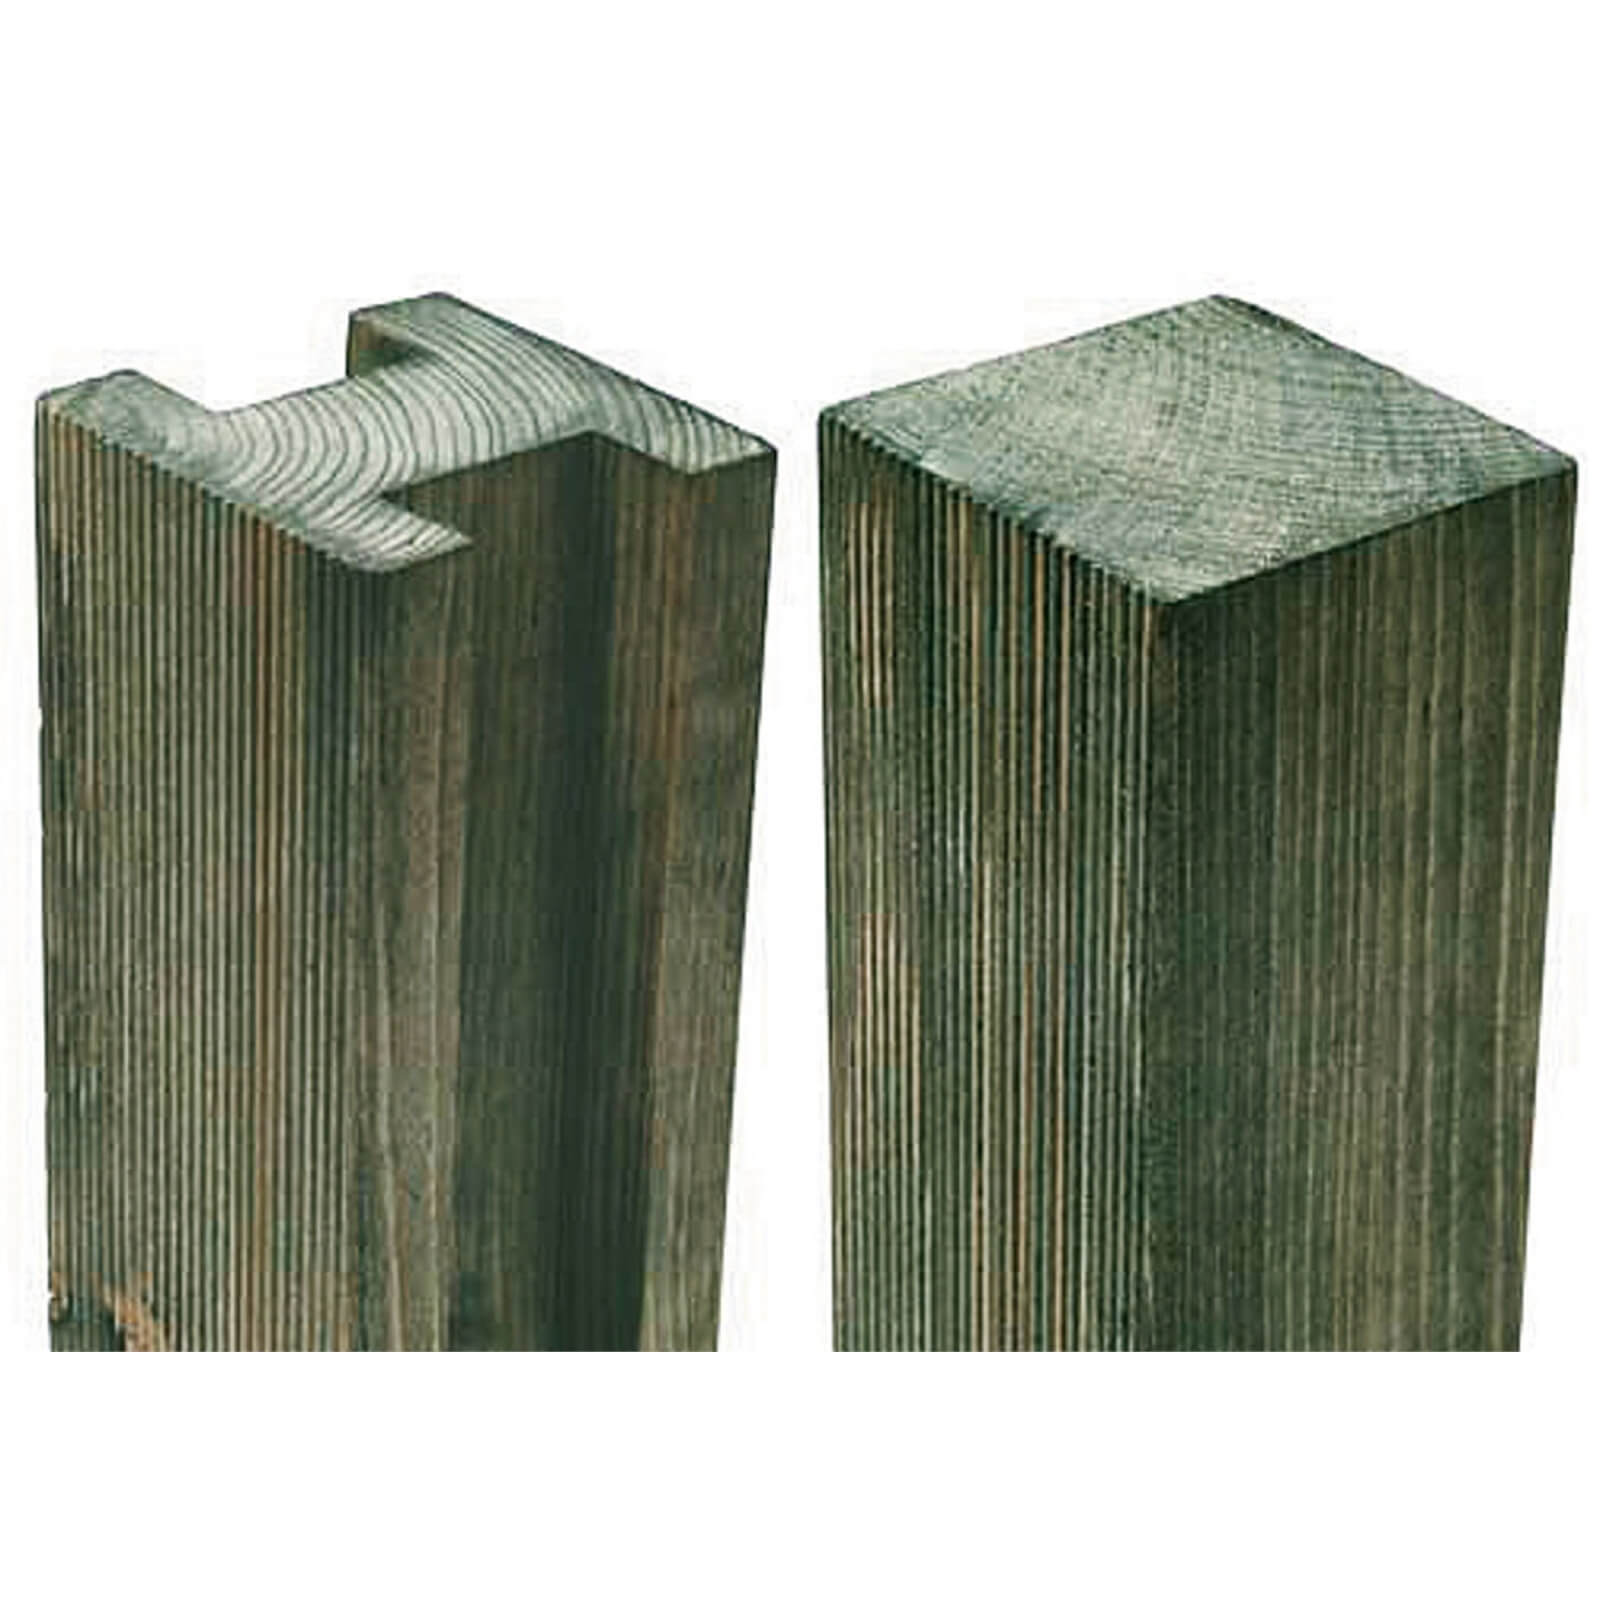 Forest Fence Post 2.1m (50 x 50 x 2100mm)